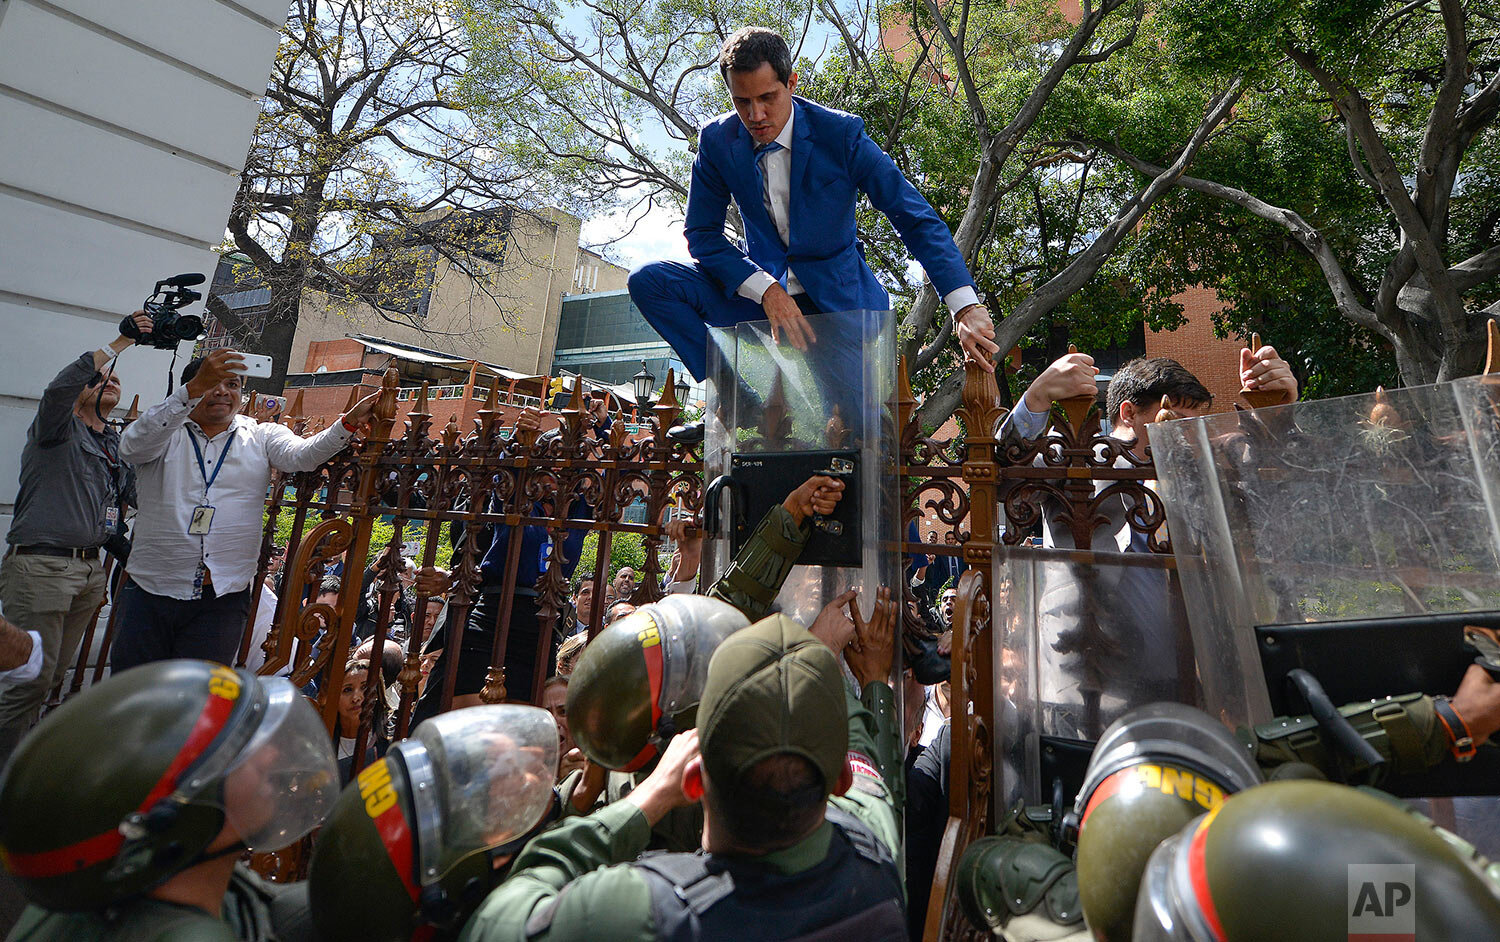  National Assembly President Juan Guaido, Venezuela's opposition leader, climbs the fence in a failed attempt to enter the compound of the Assembly, as he and other opposition lawmakers are blocked from entering a session to elect new Assembly leader